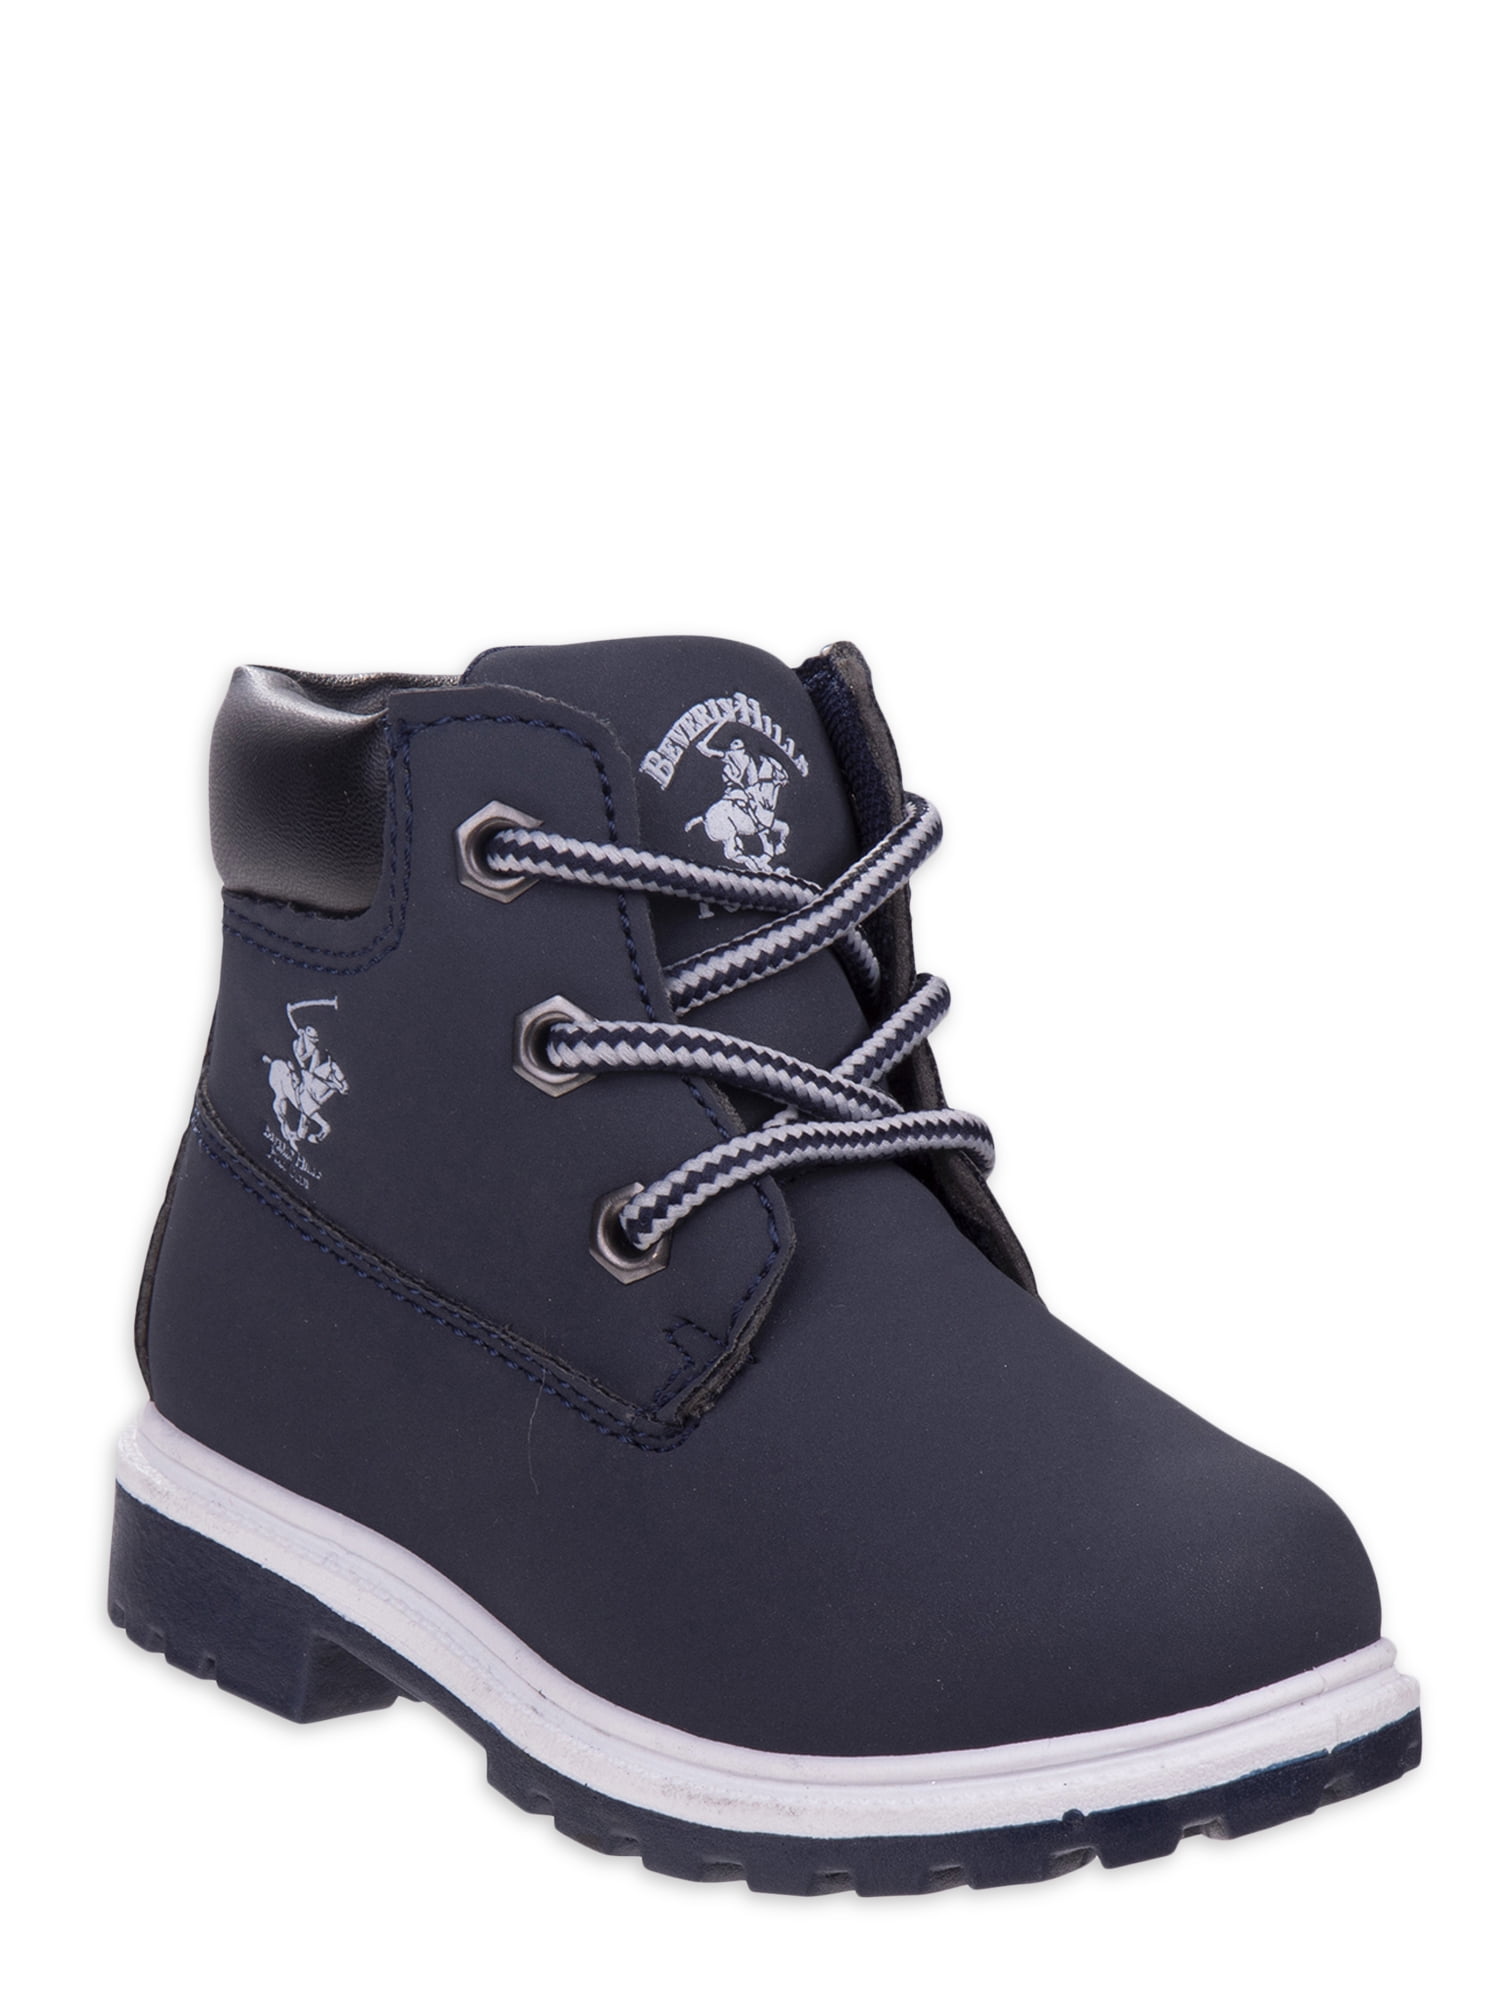 beverly hills polo club boots